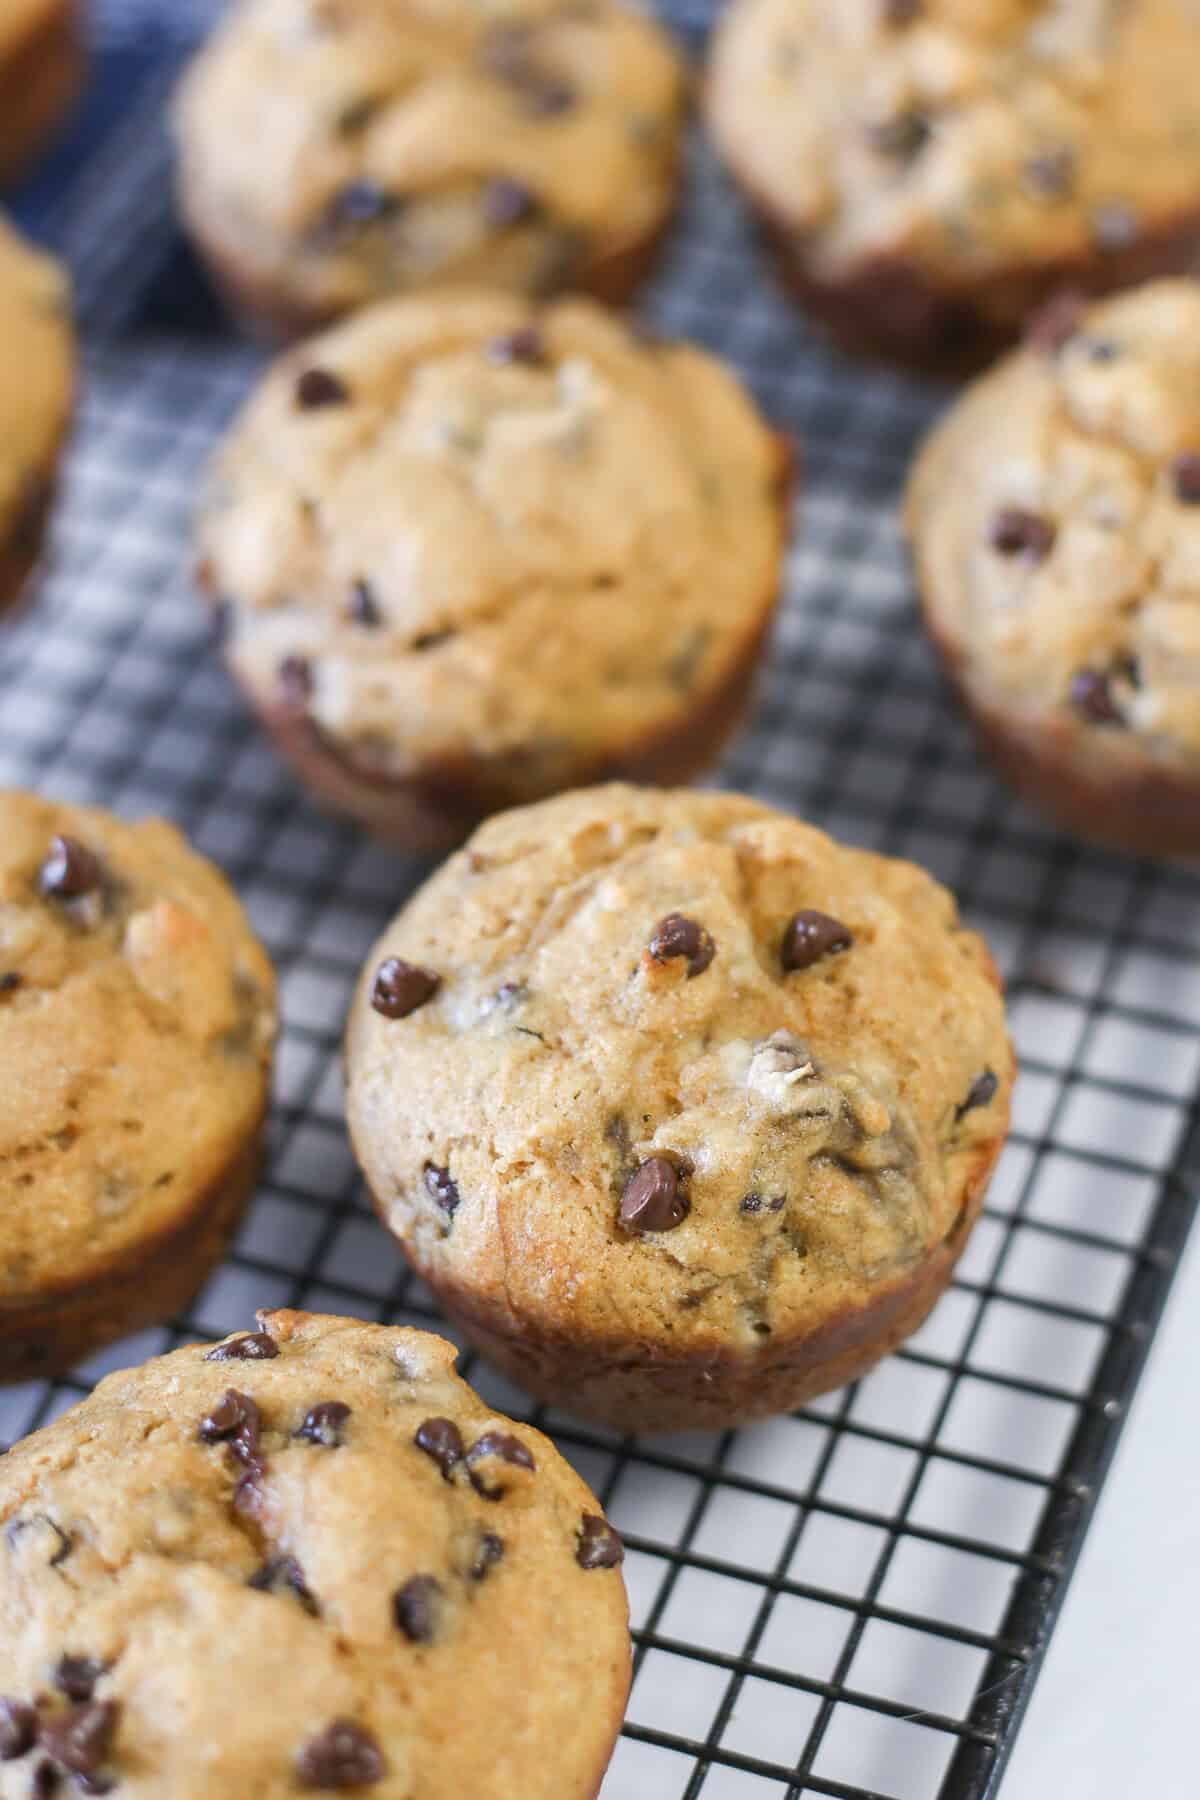 Multiple banana chocolate chip muffins on a cooling rack.